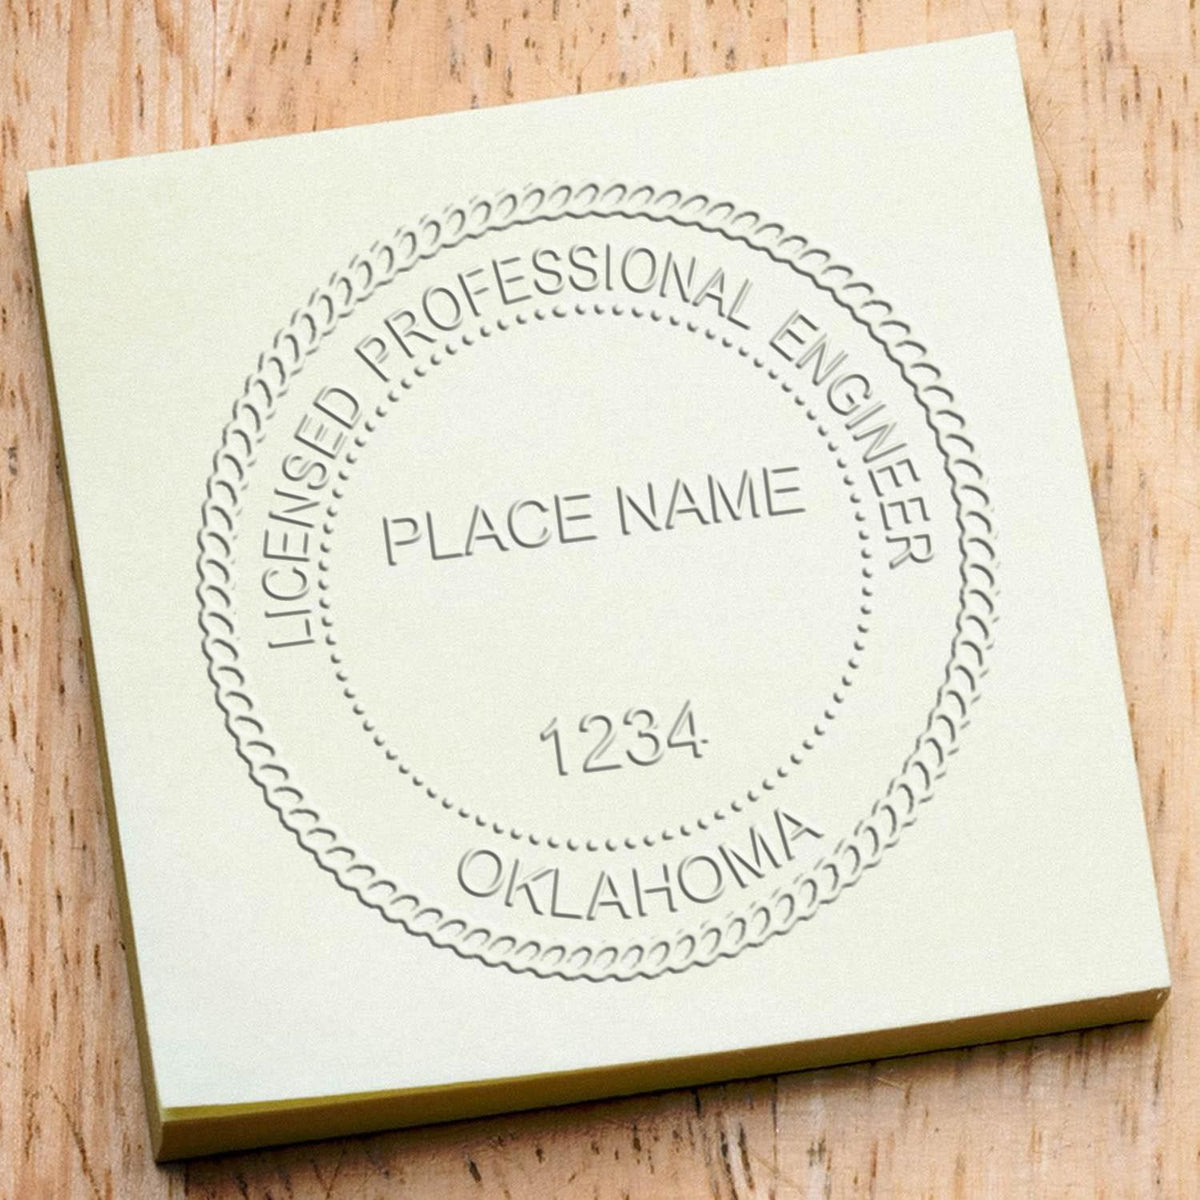 The State of Oklahoma Extended Long Reach Engineer Seal stamp impression comes to life with a crisp, detailed photo on paper - showcasing true professional quality.